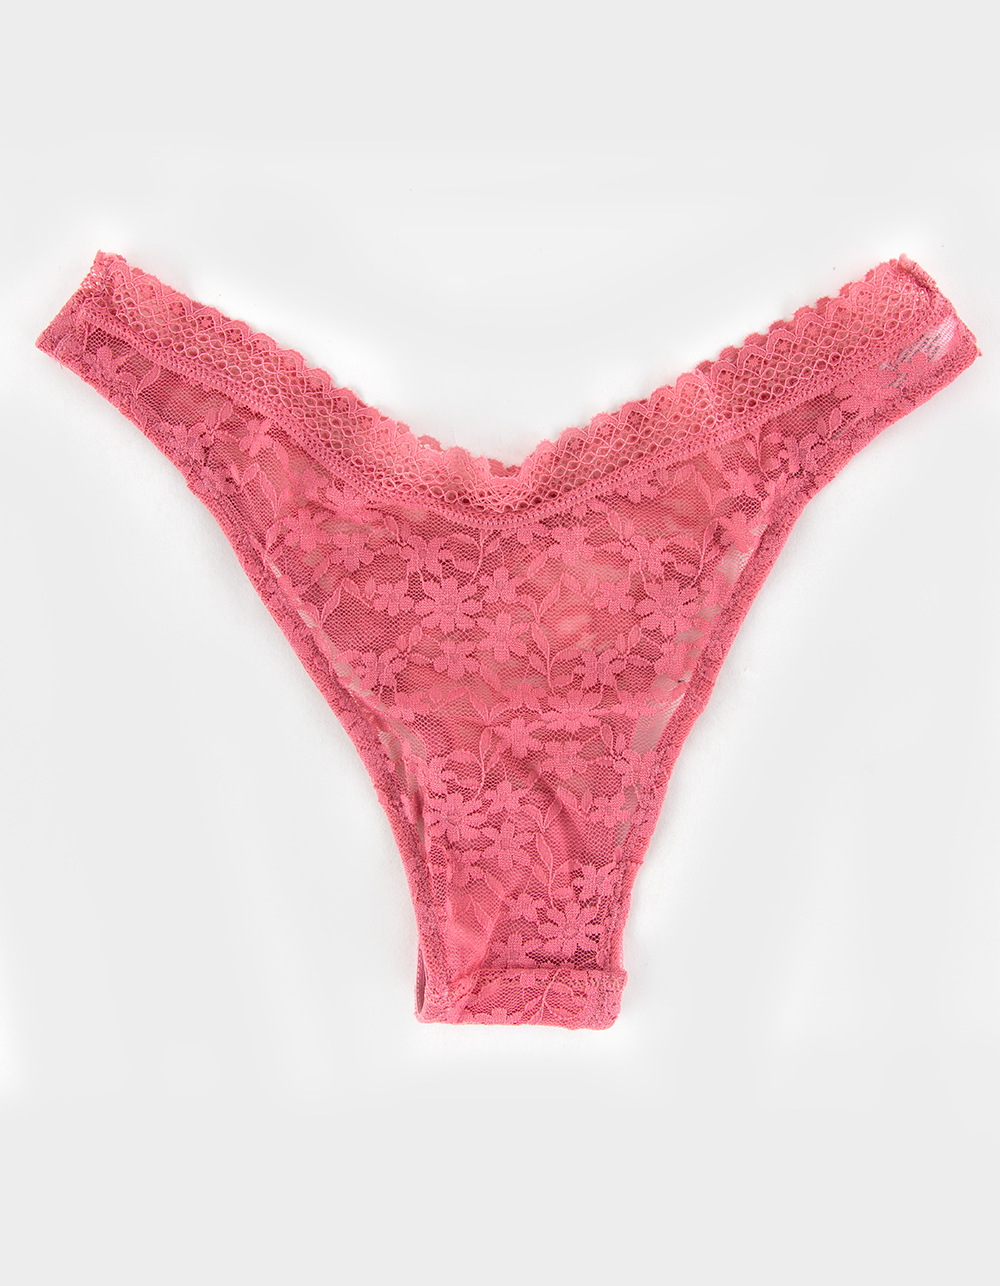 New Urban Outfitters high leg thong string panty underwear Pink